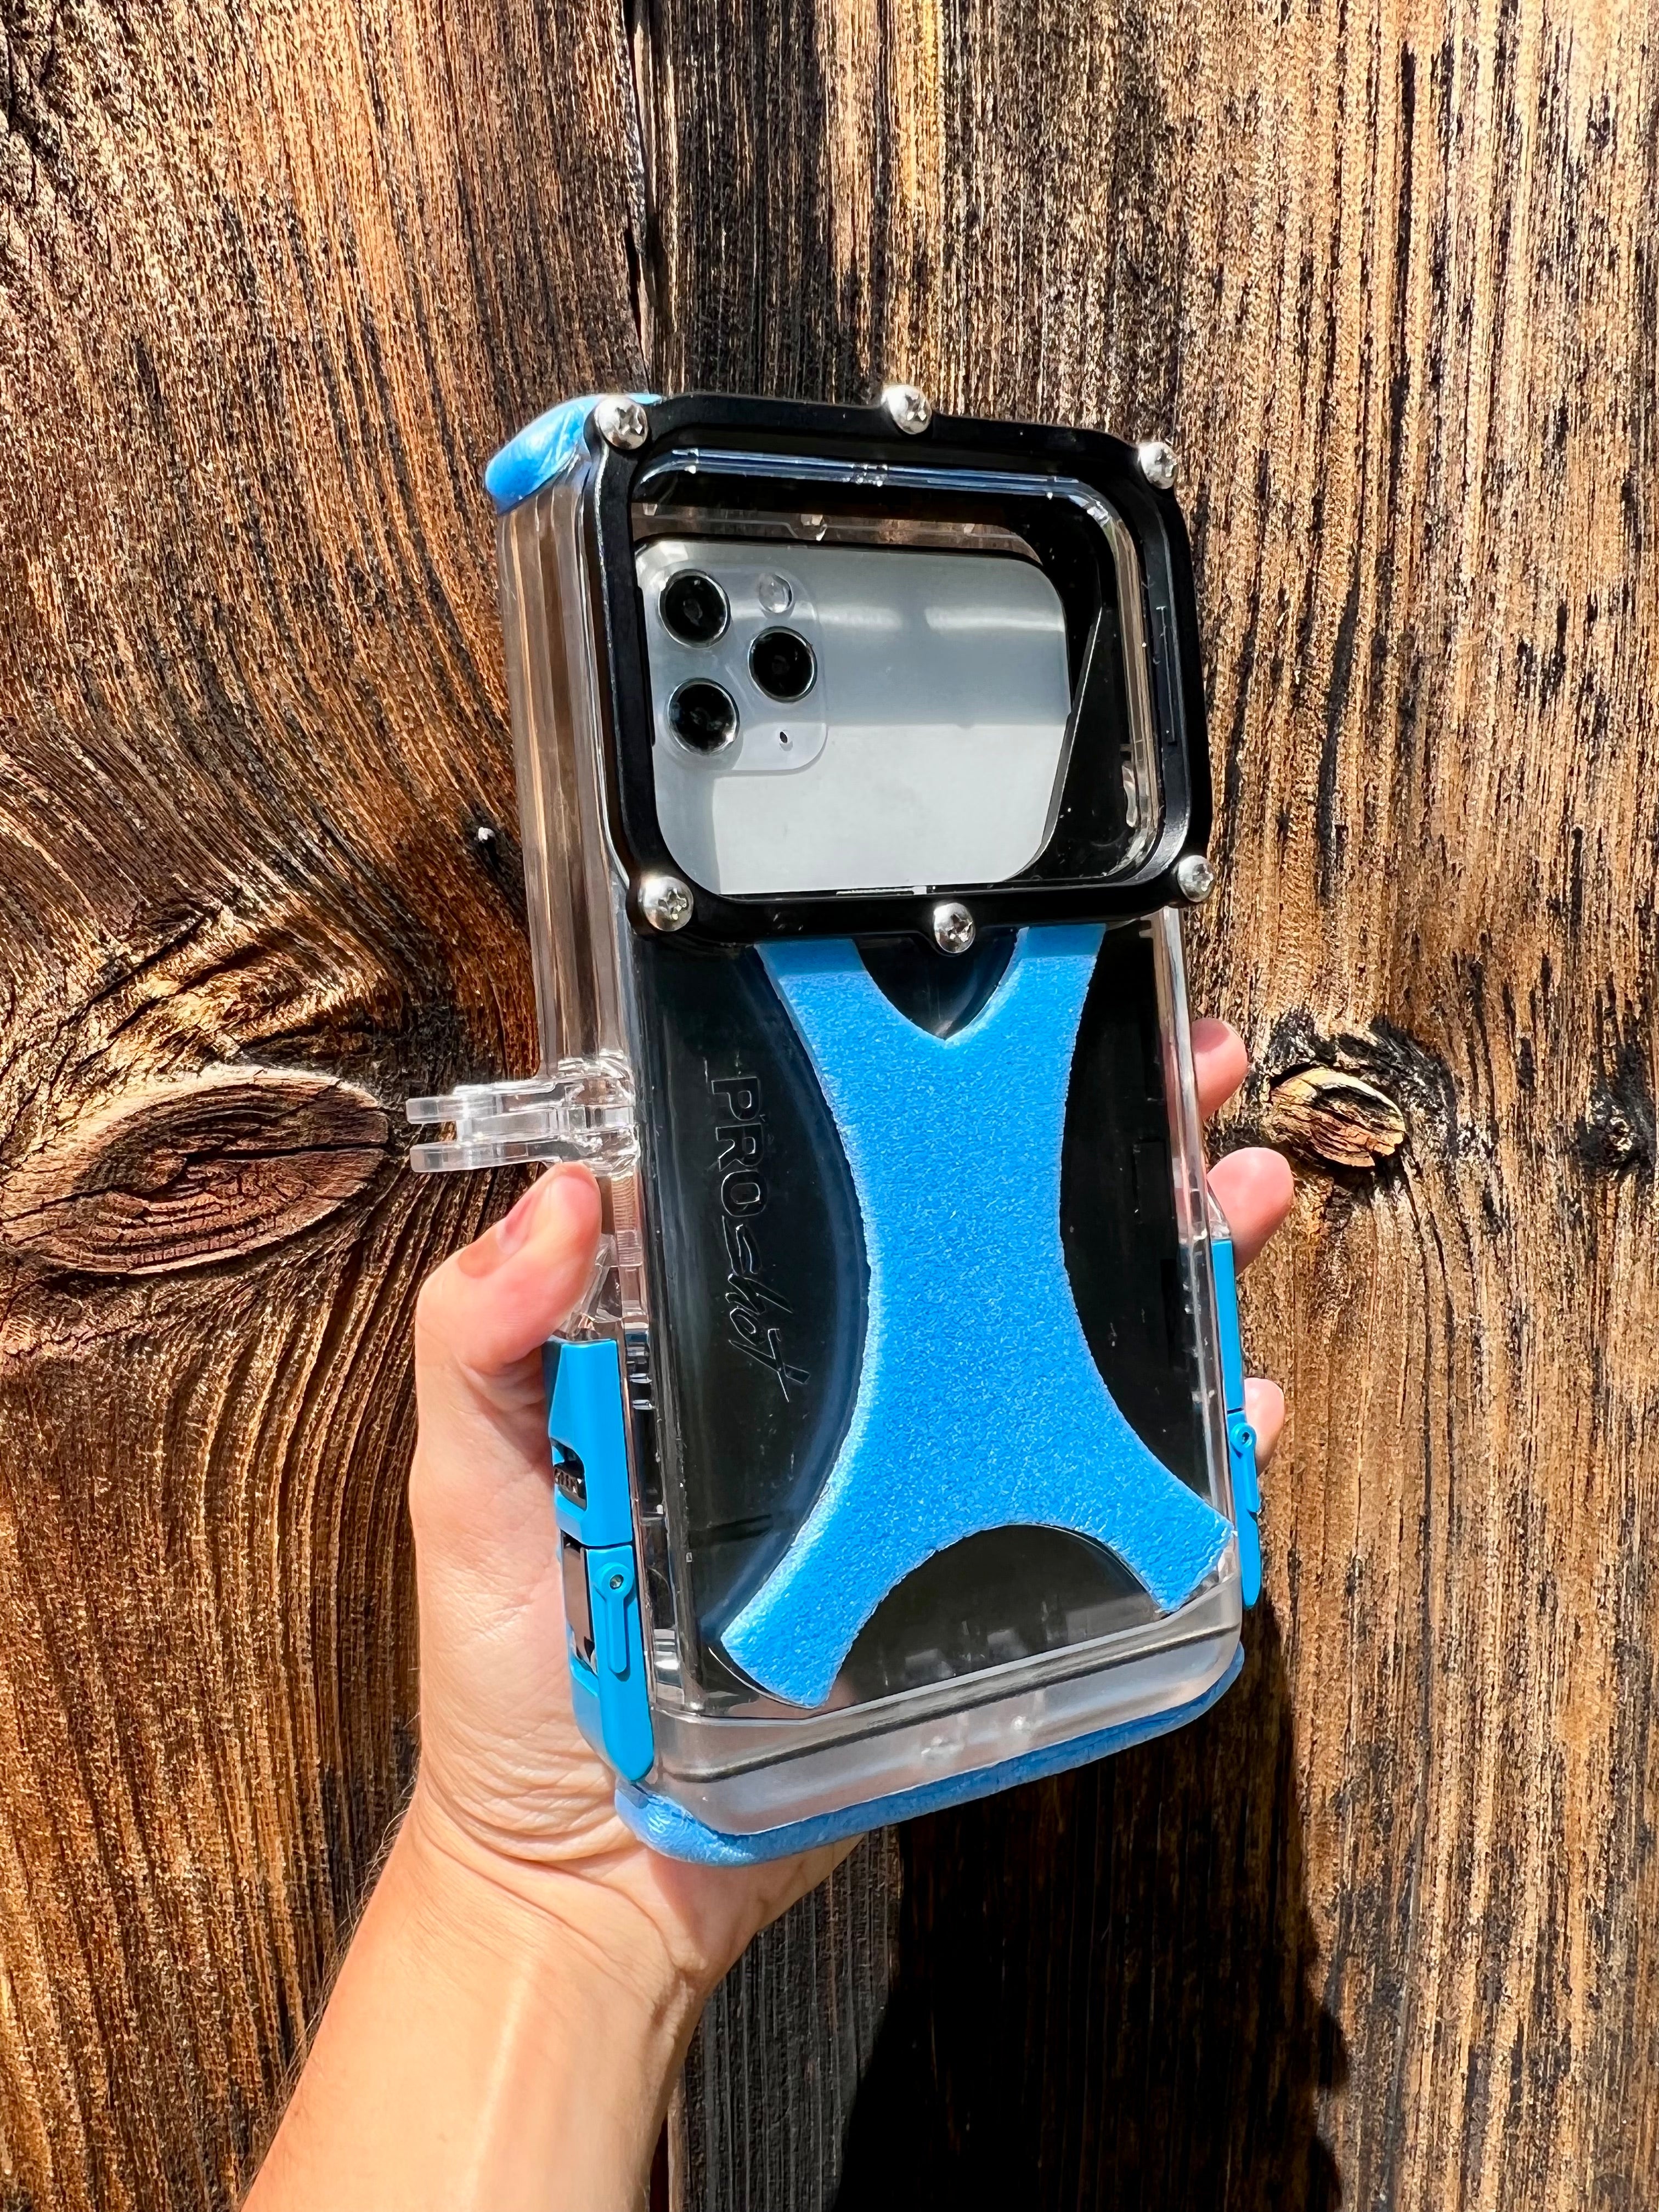 Hitcase PRO for iPhone X/Xs